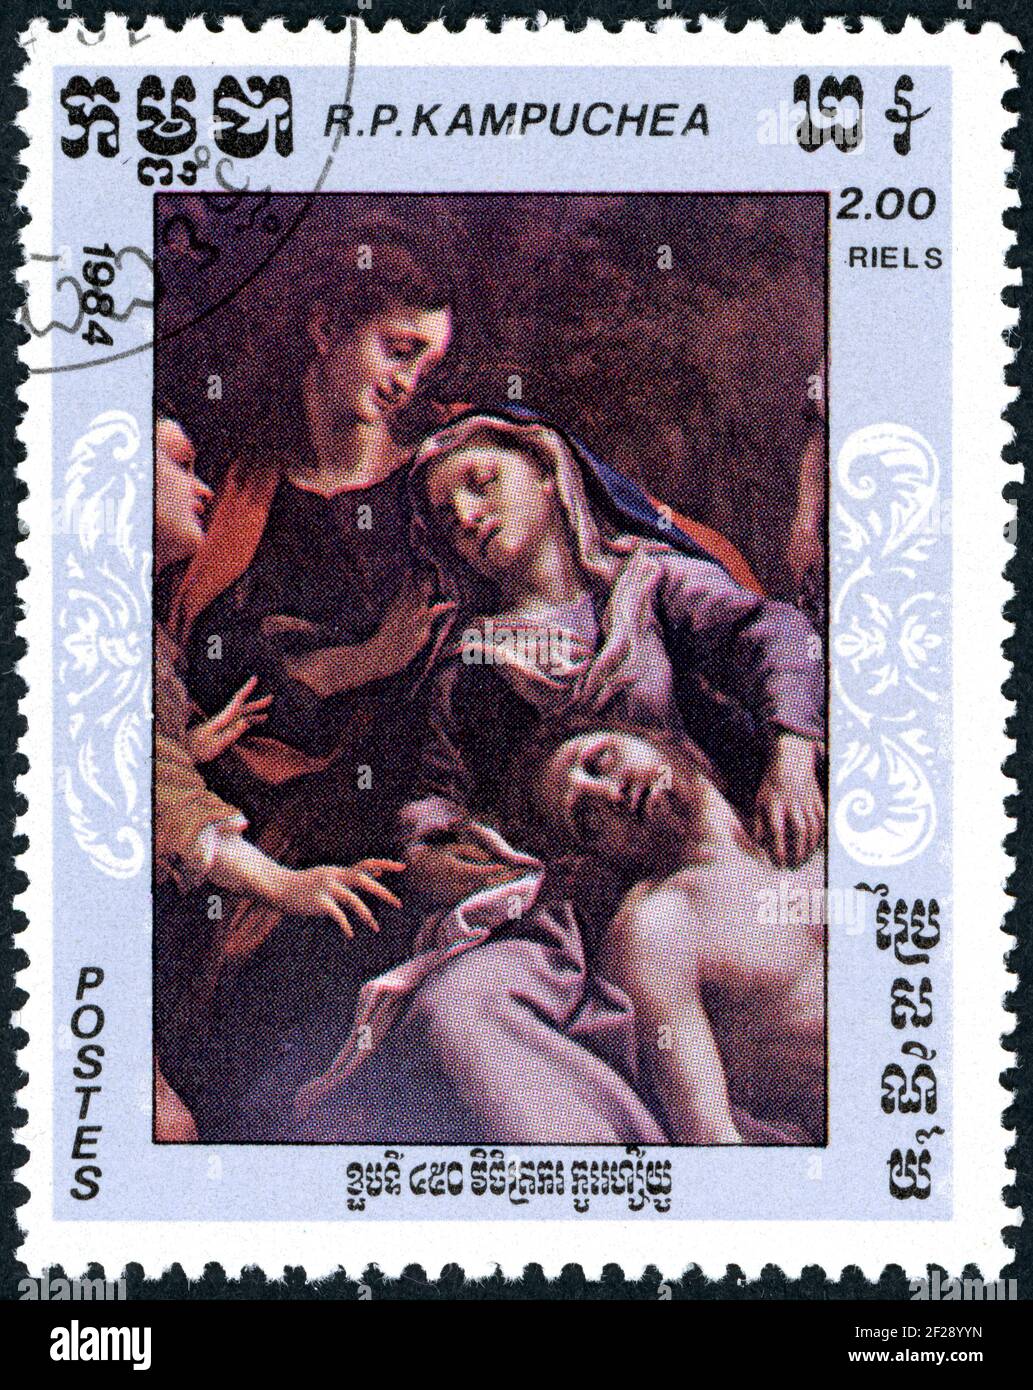 KAMPUCHEA - CIRCA 1984: A stamp printed in Kampuchea, shown the details from paintings: The Deposition, by Antonio da Correggio, circa 1984 Stock Photo